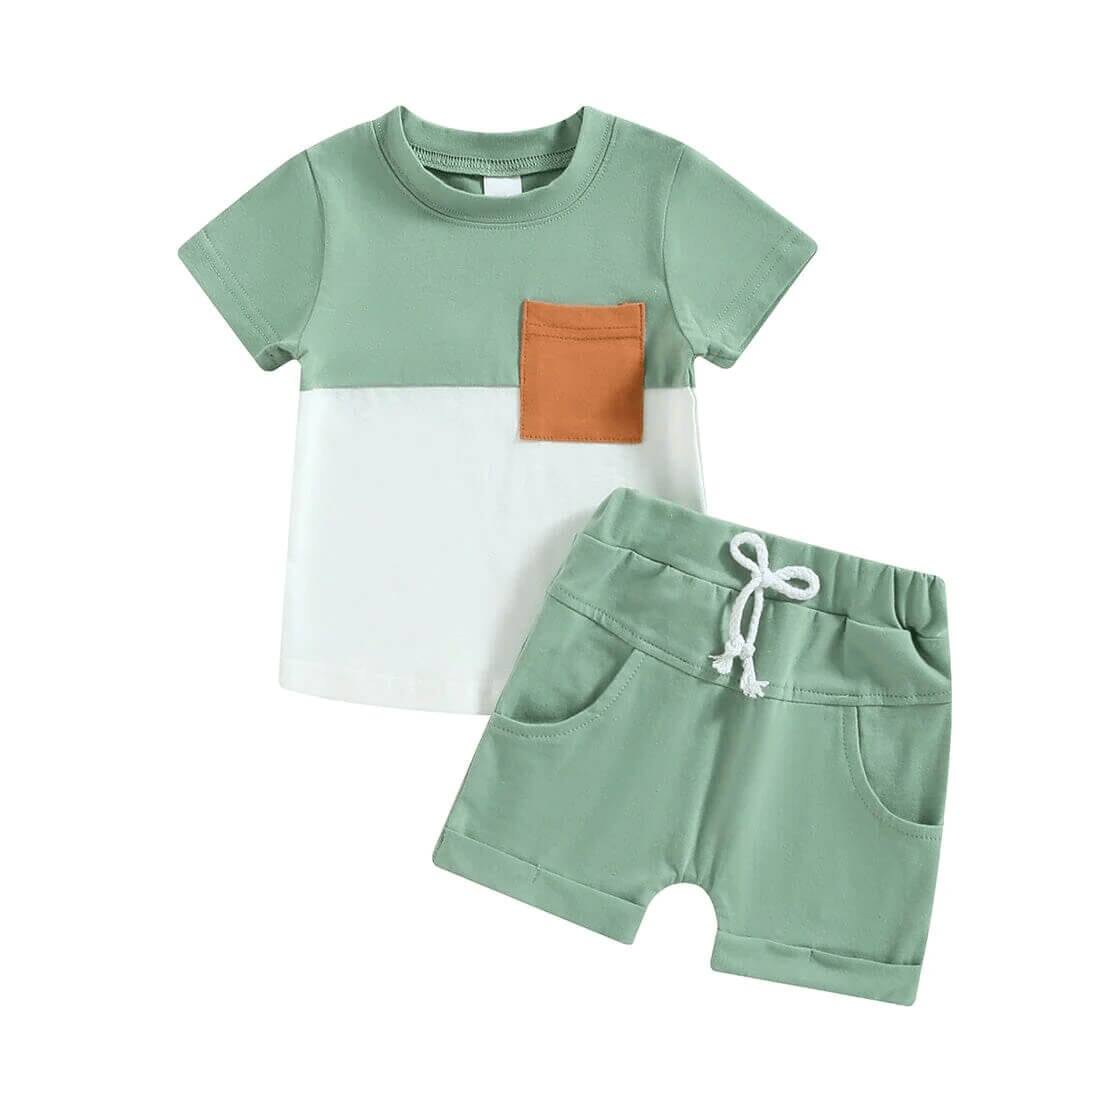 2PC Infant Baby Boy Outfit Bow tie Shirt Top+Straps Shorts Gentleman Clothes  Set | eBay